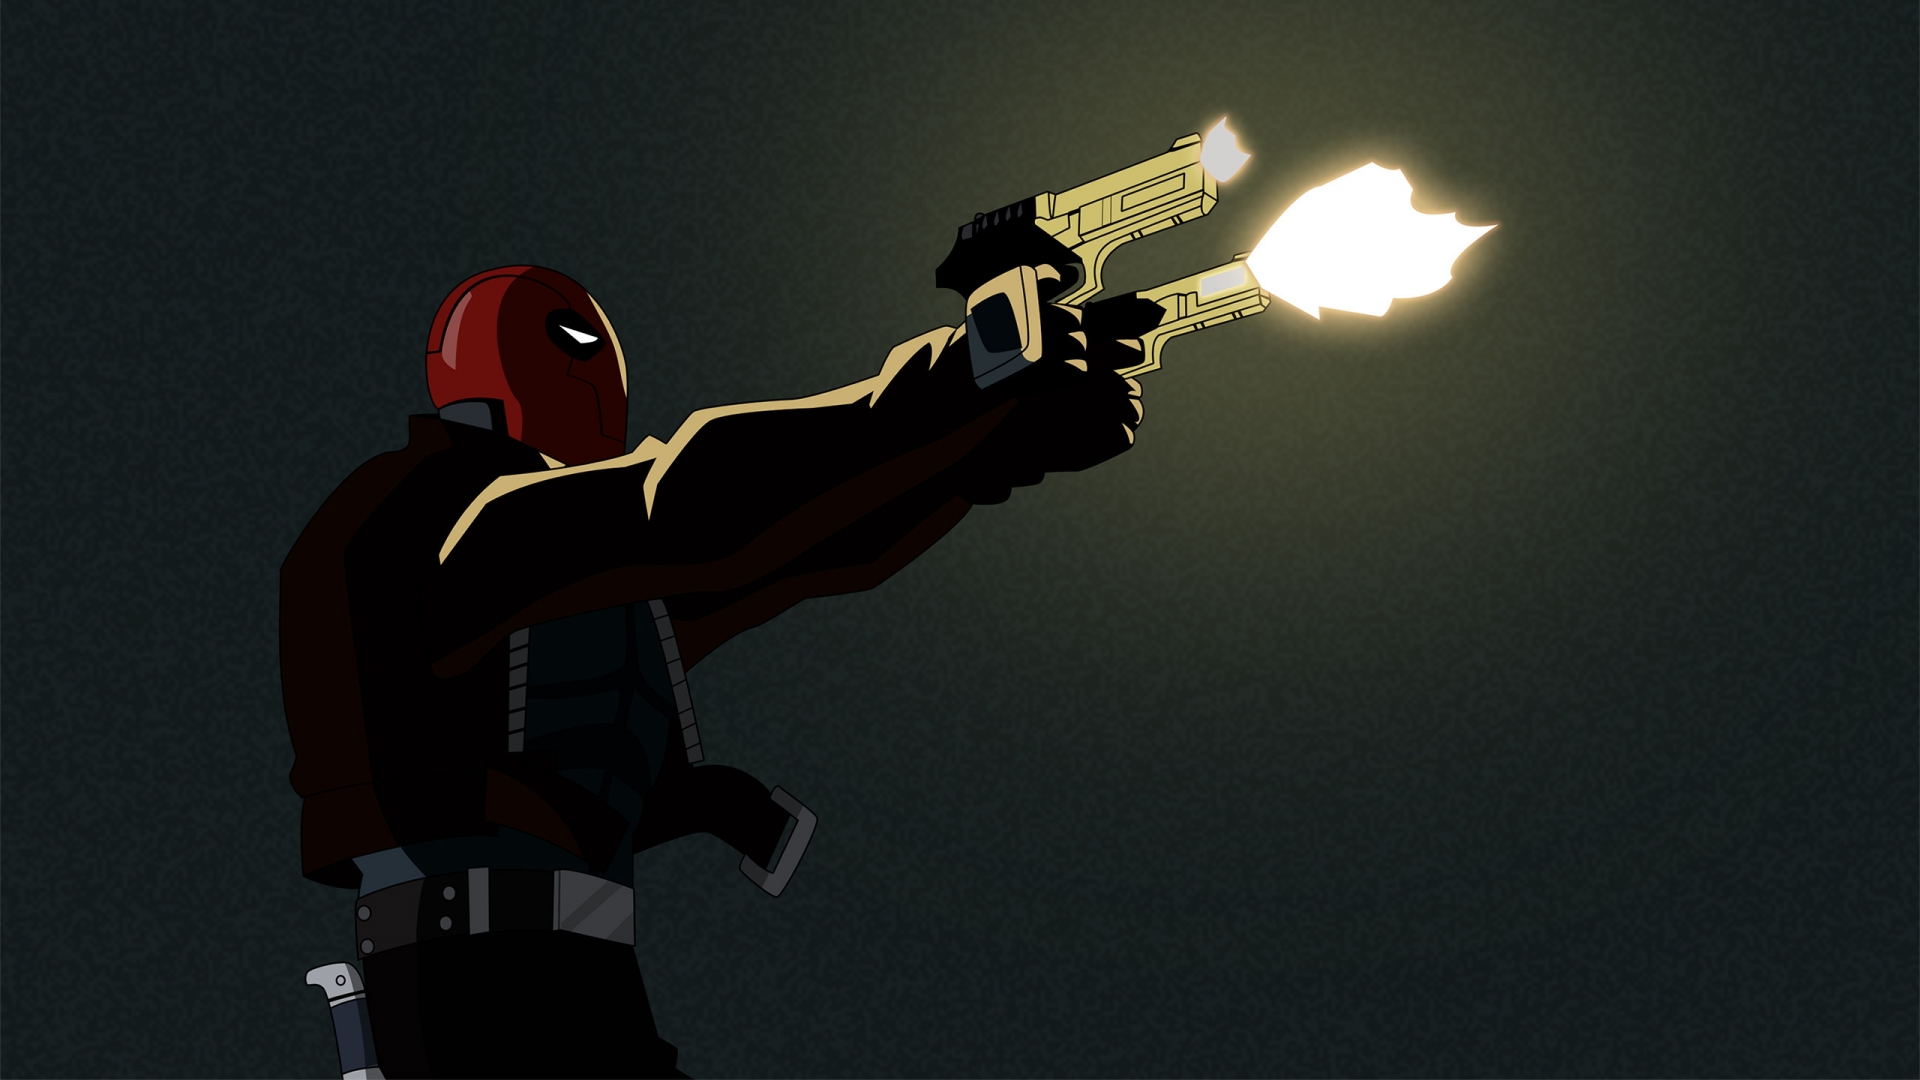 Redhood for 1920 x 1080 HDTV 1080p resolution